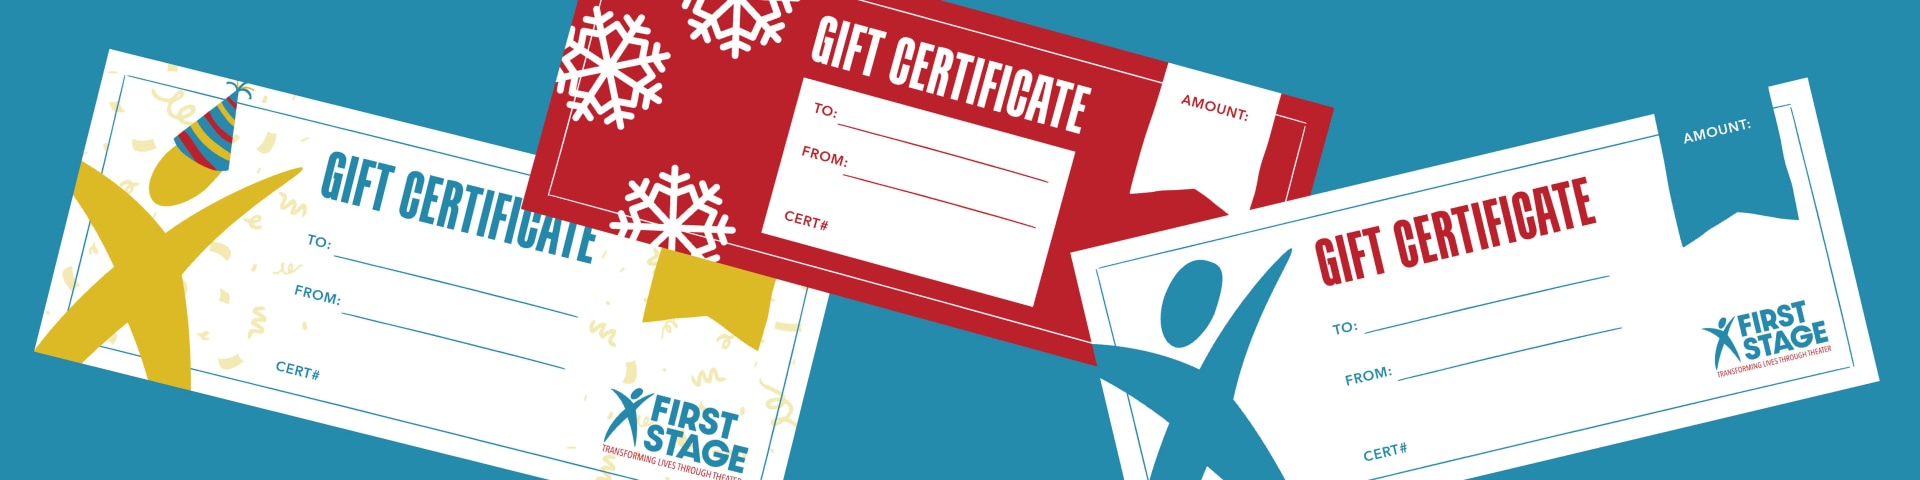 a red and white gift certificate